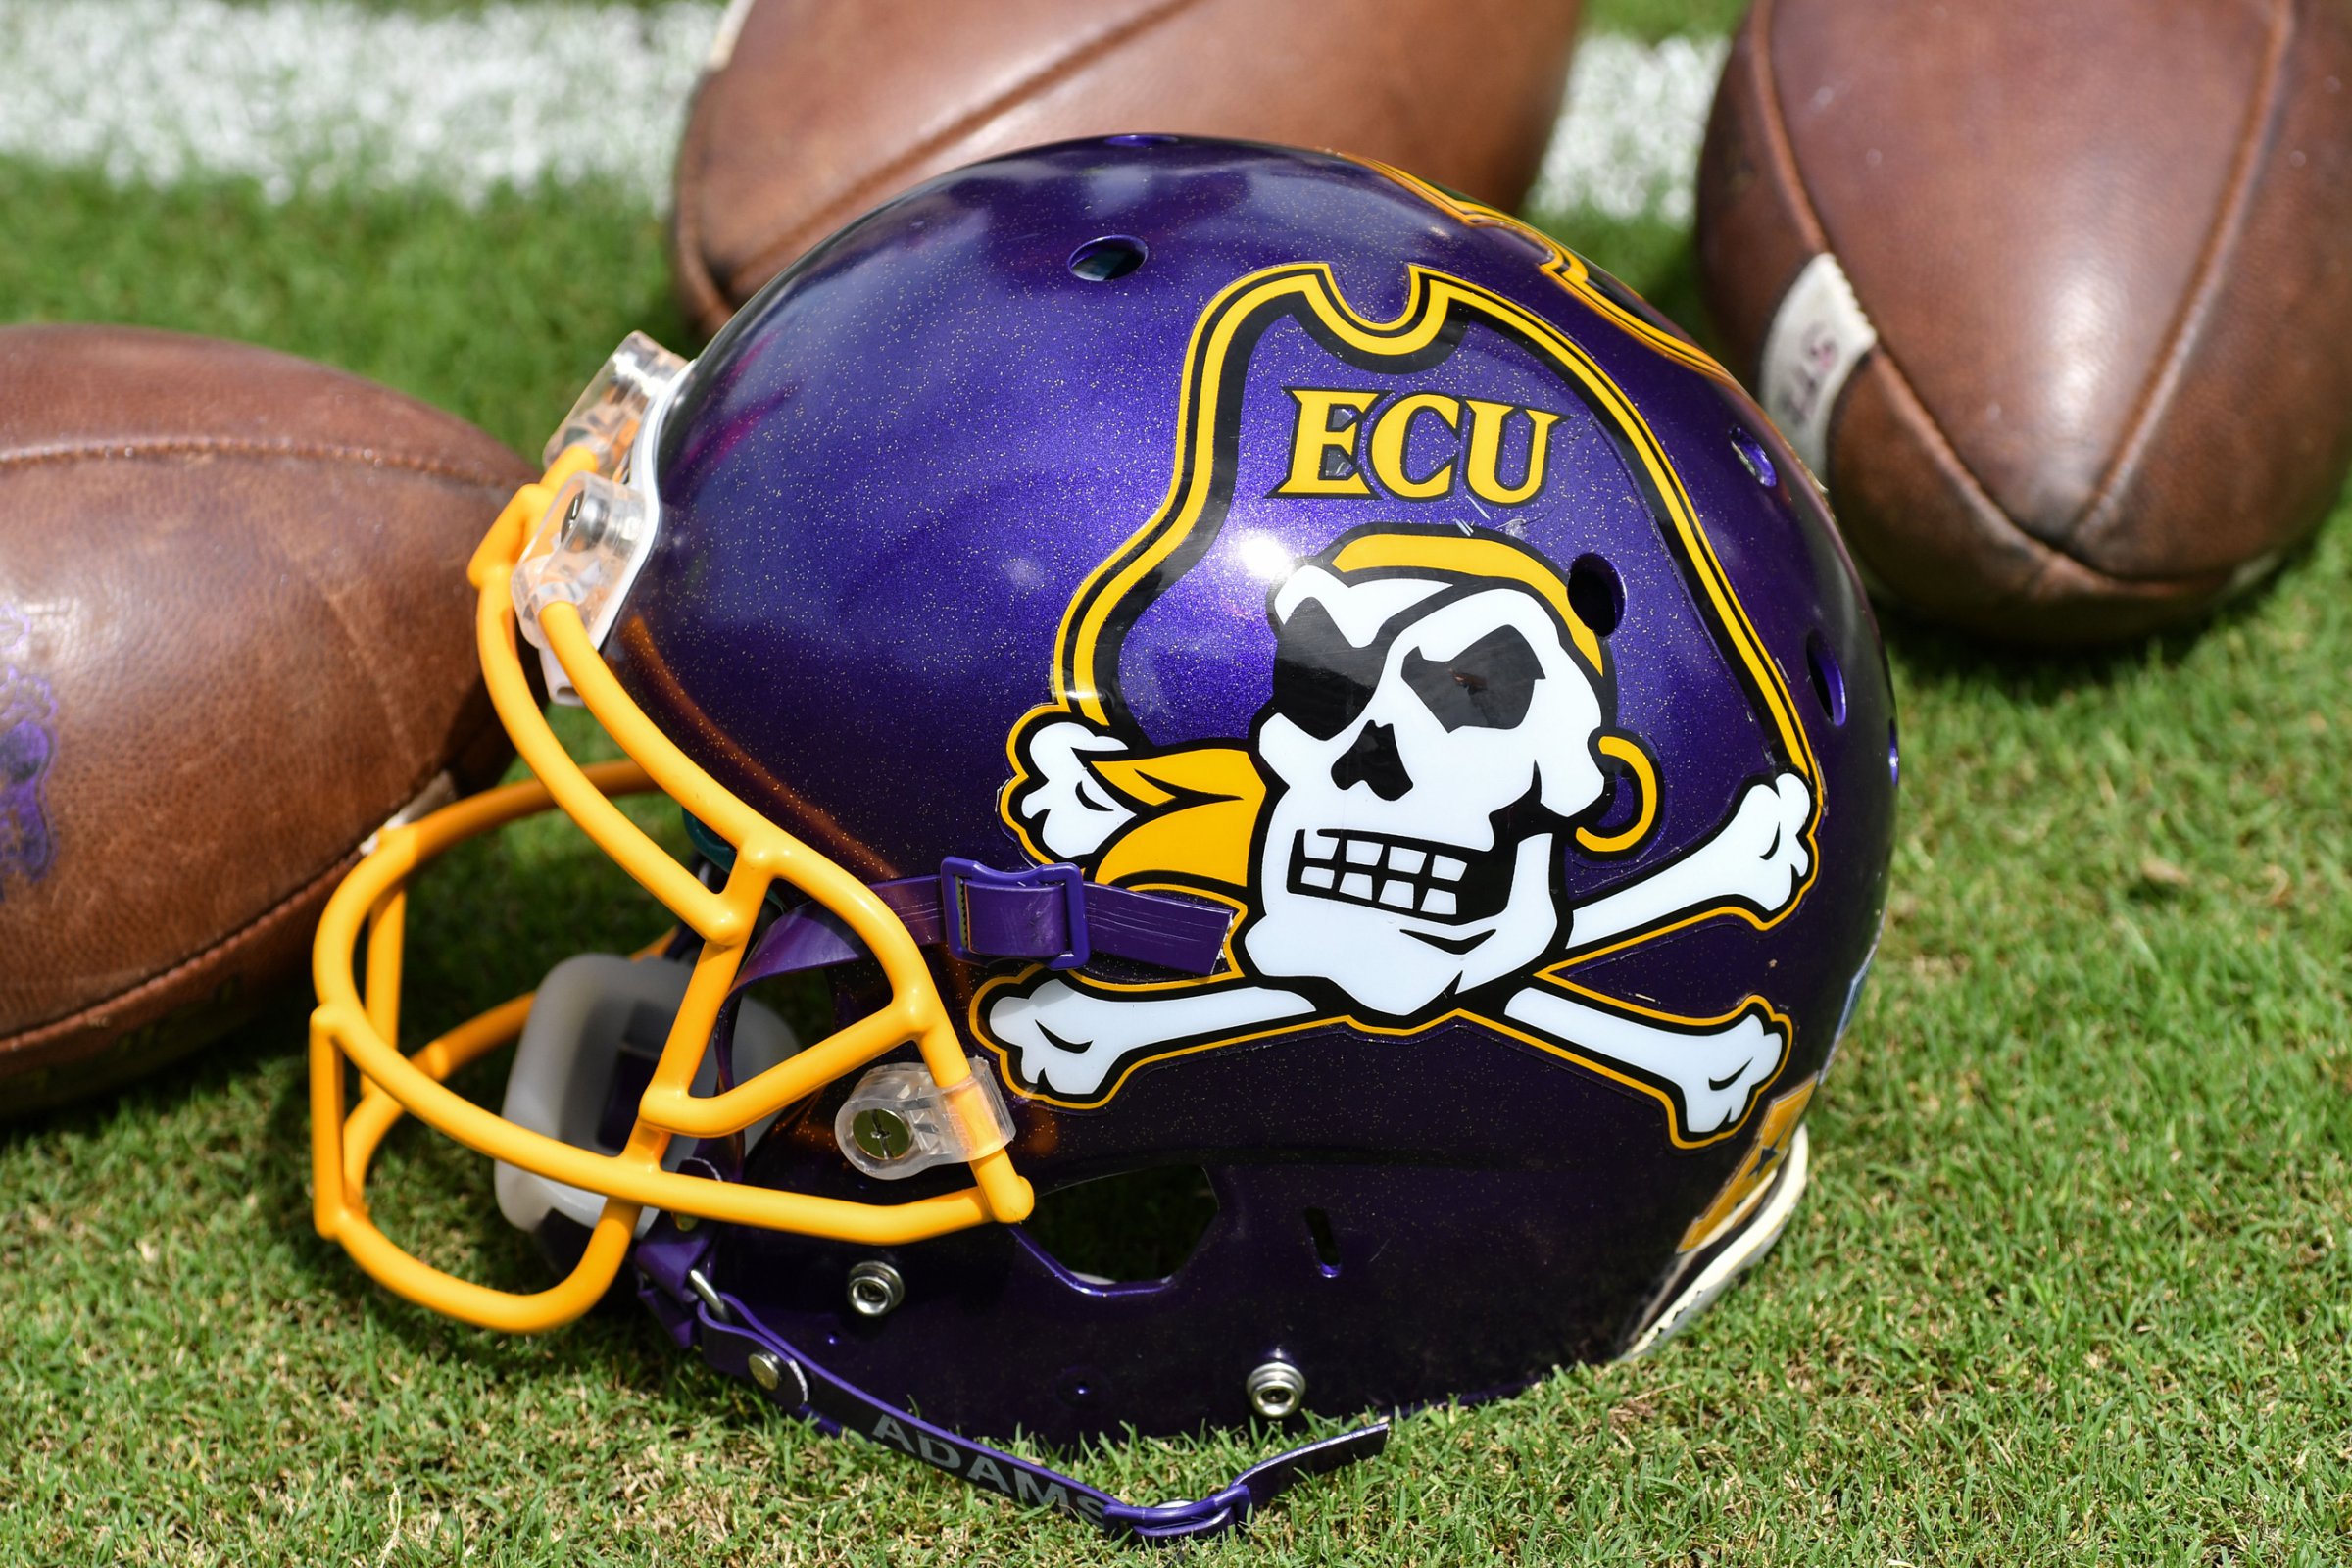 October 1, 2016: East Carolina helmet in a game between the East Carolina Pirates and the Central Florida Knights at Dowdy-Ficklen Stadium in Greenville, NC. Central Florida defeated East Carolina 47 - 29. (Photograph by Greg Thompson/Icon Sportswire) (Icon Sportswire via AP Images)